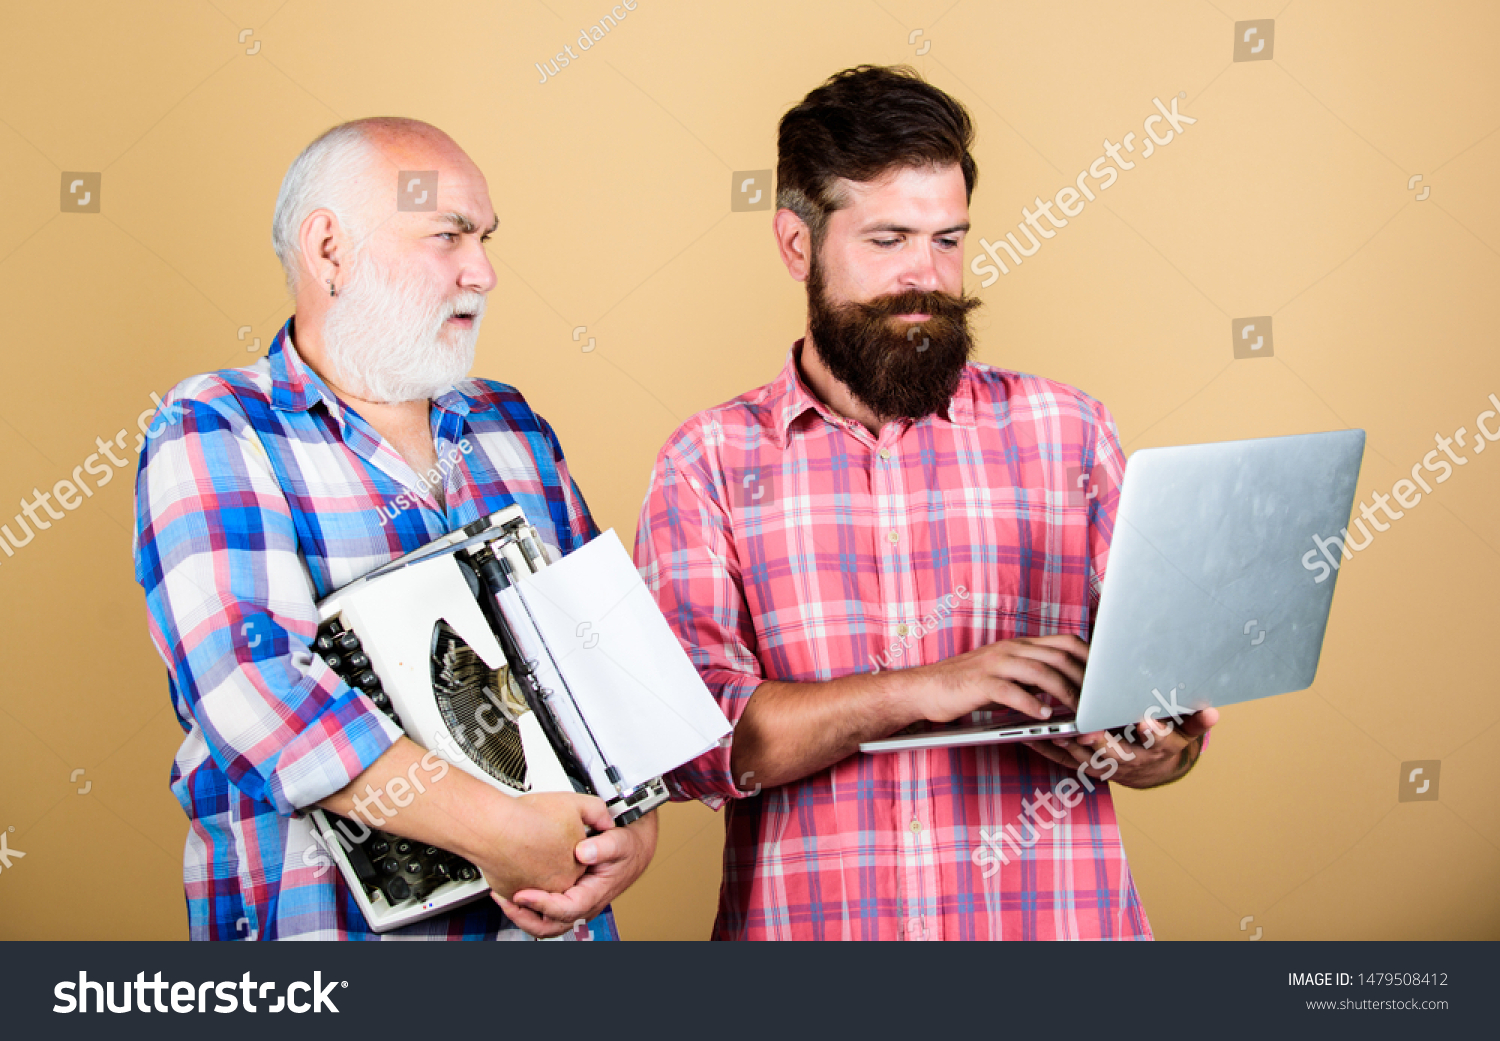 master service. youth vs old age. business approach. father and son. family generation. retro typewriter vs laptop. New technology. technology battle. Modern life. two bearded men. Vintage typewriter. #1479508412